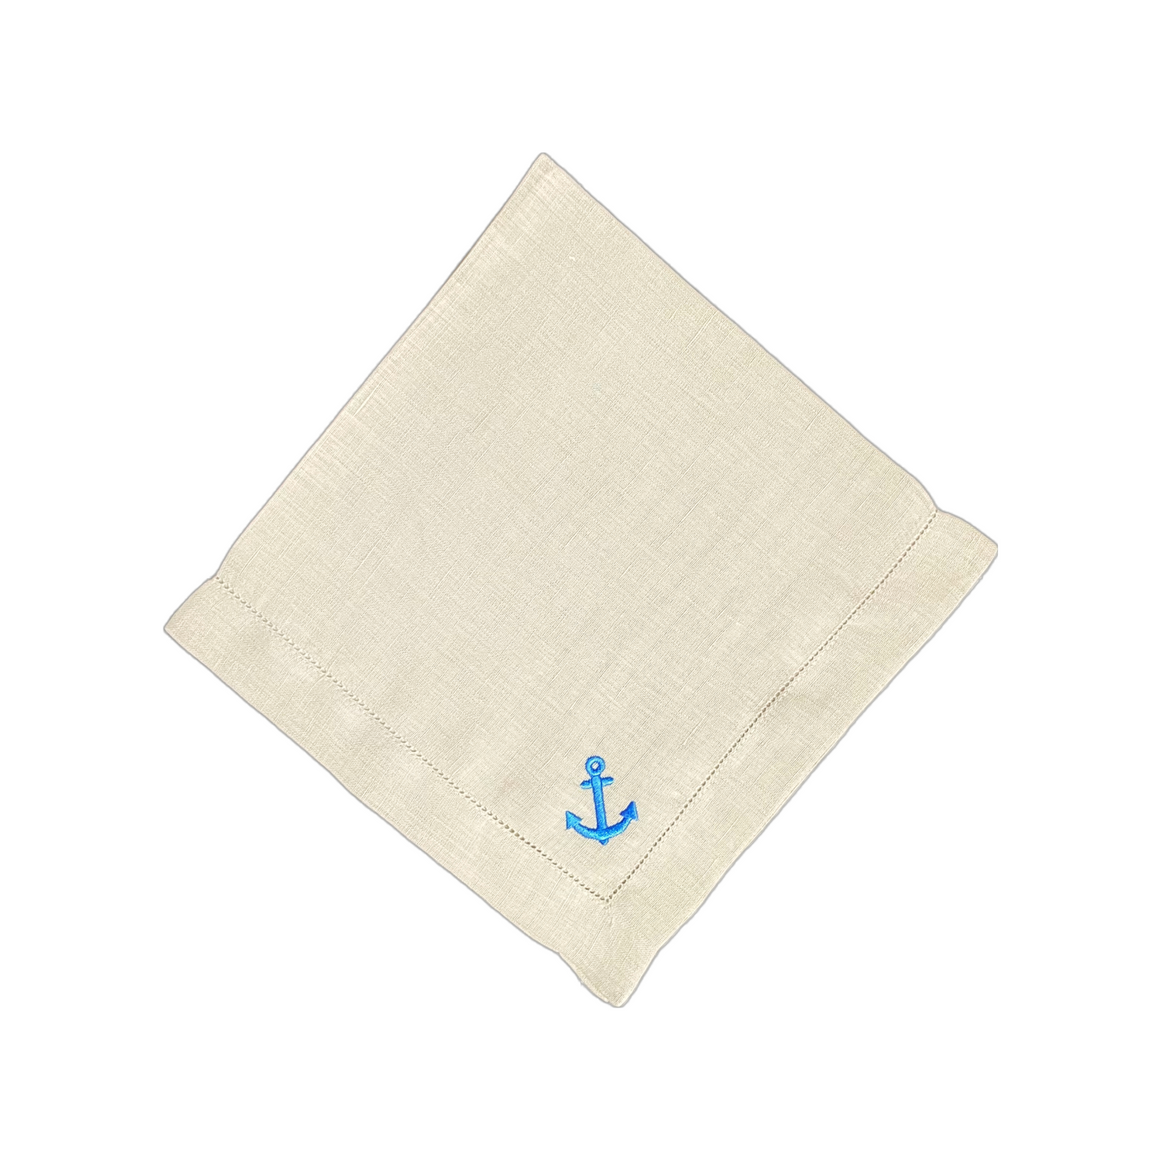 Beige Linen Napkins with Royal Blue Embroidered Anchor, Set of 4